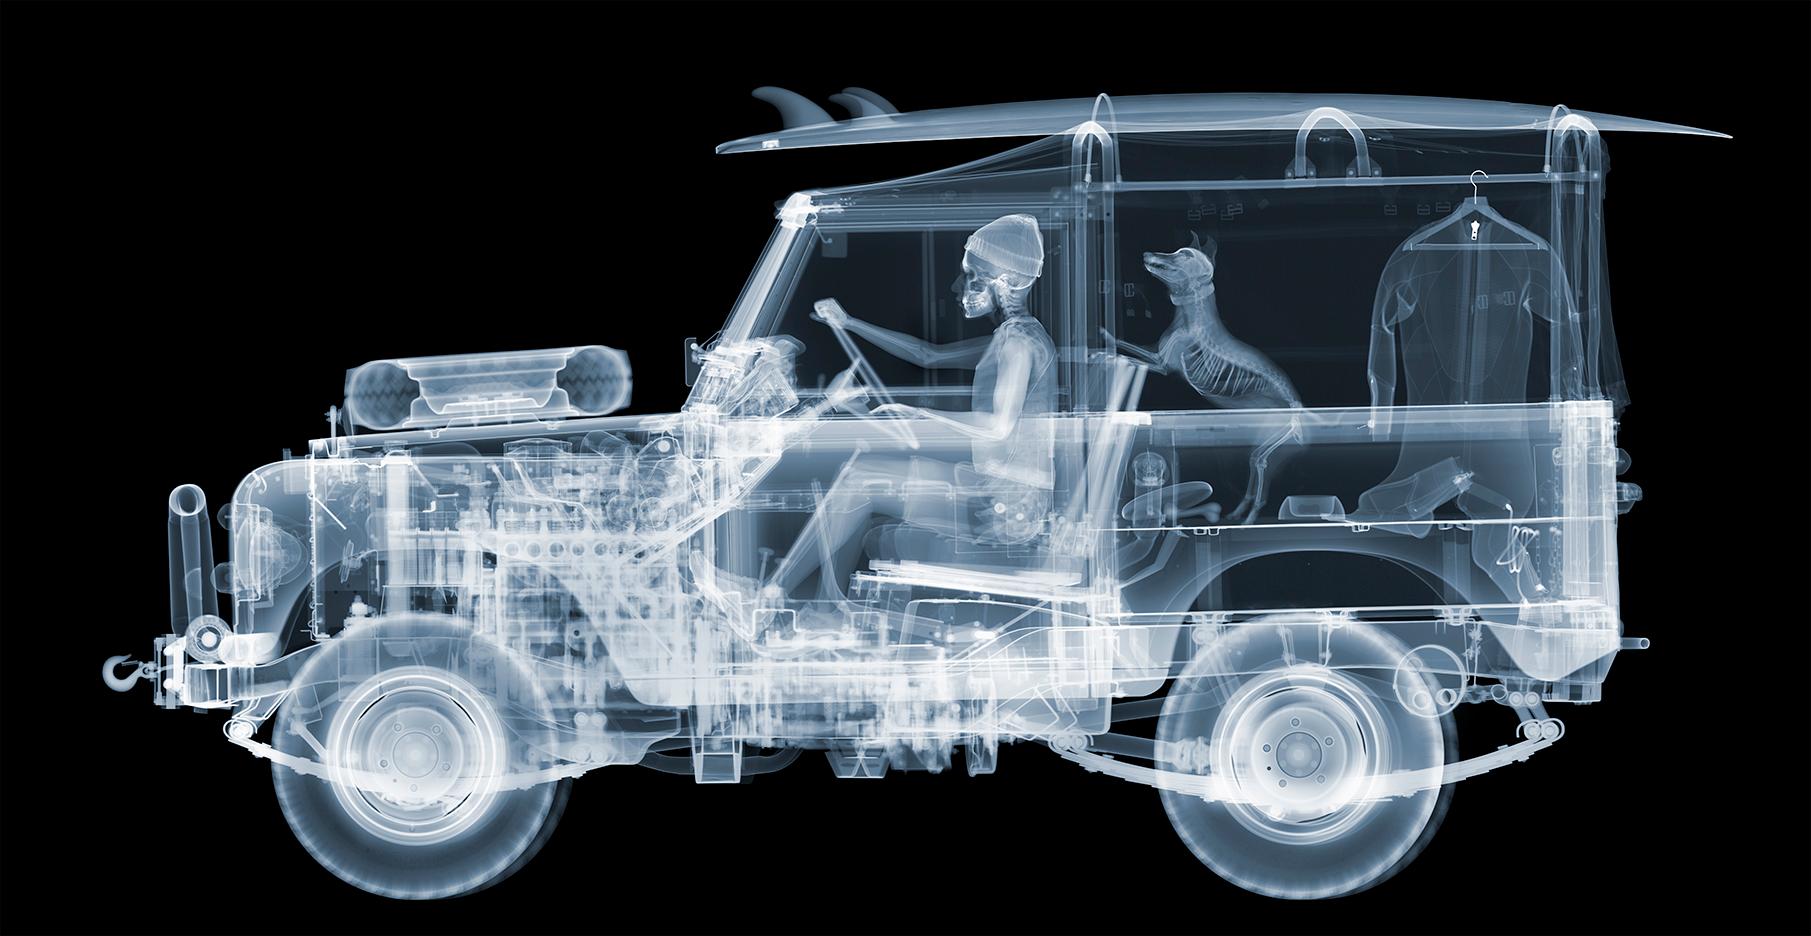 Nick Veasey Black and White Photograph – Land Rover Surf's Up